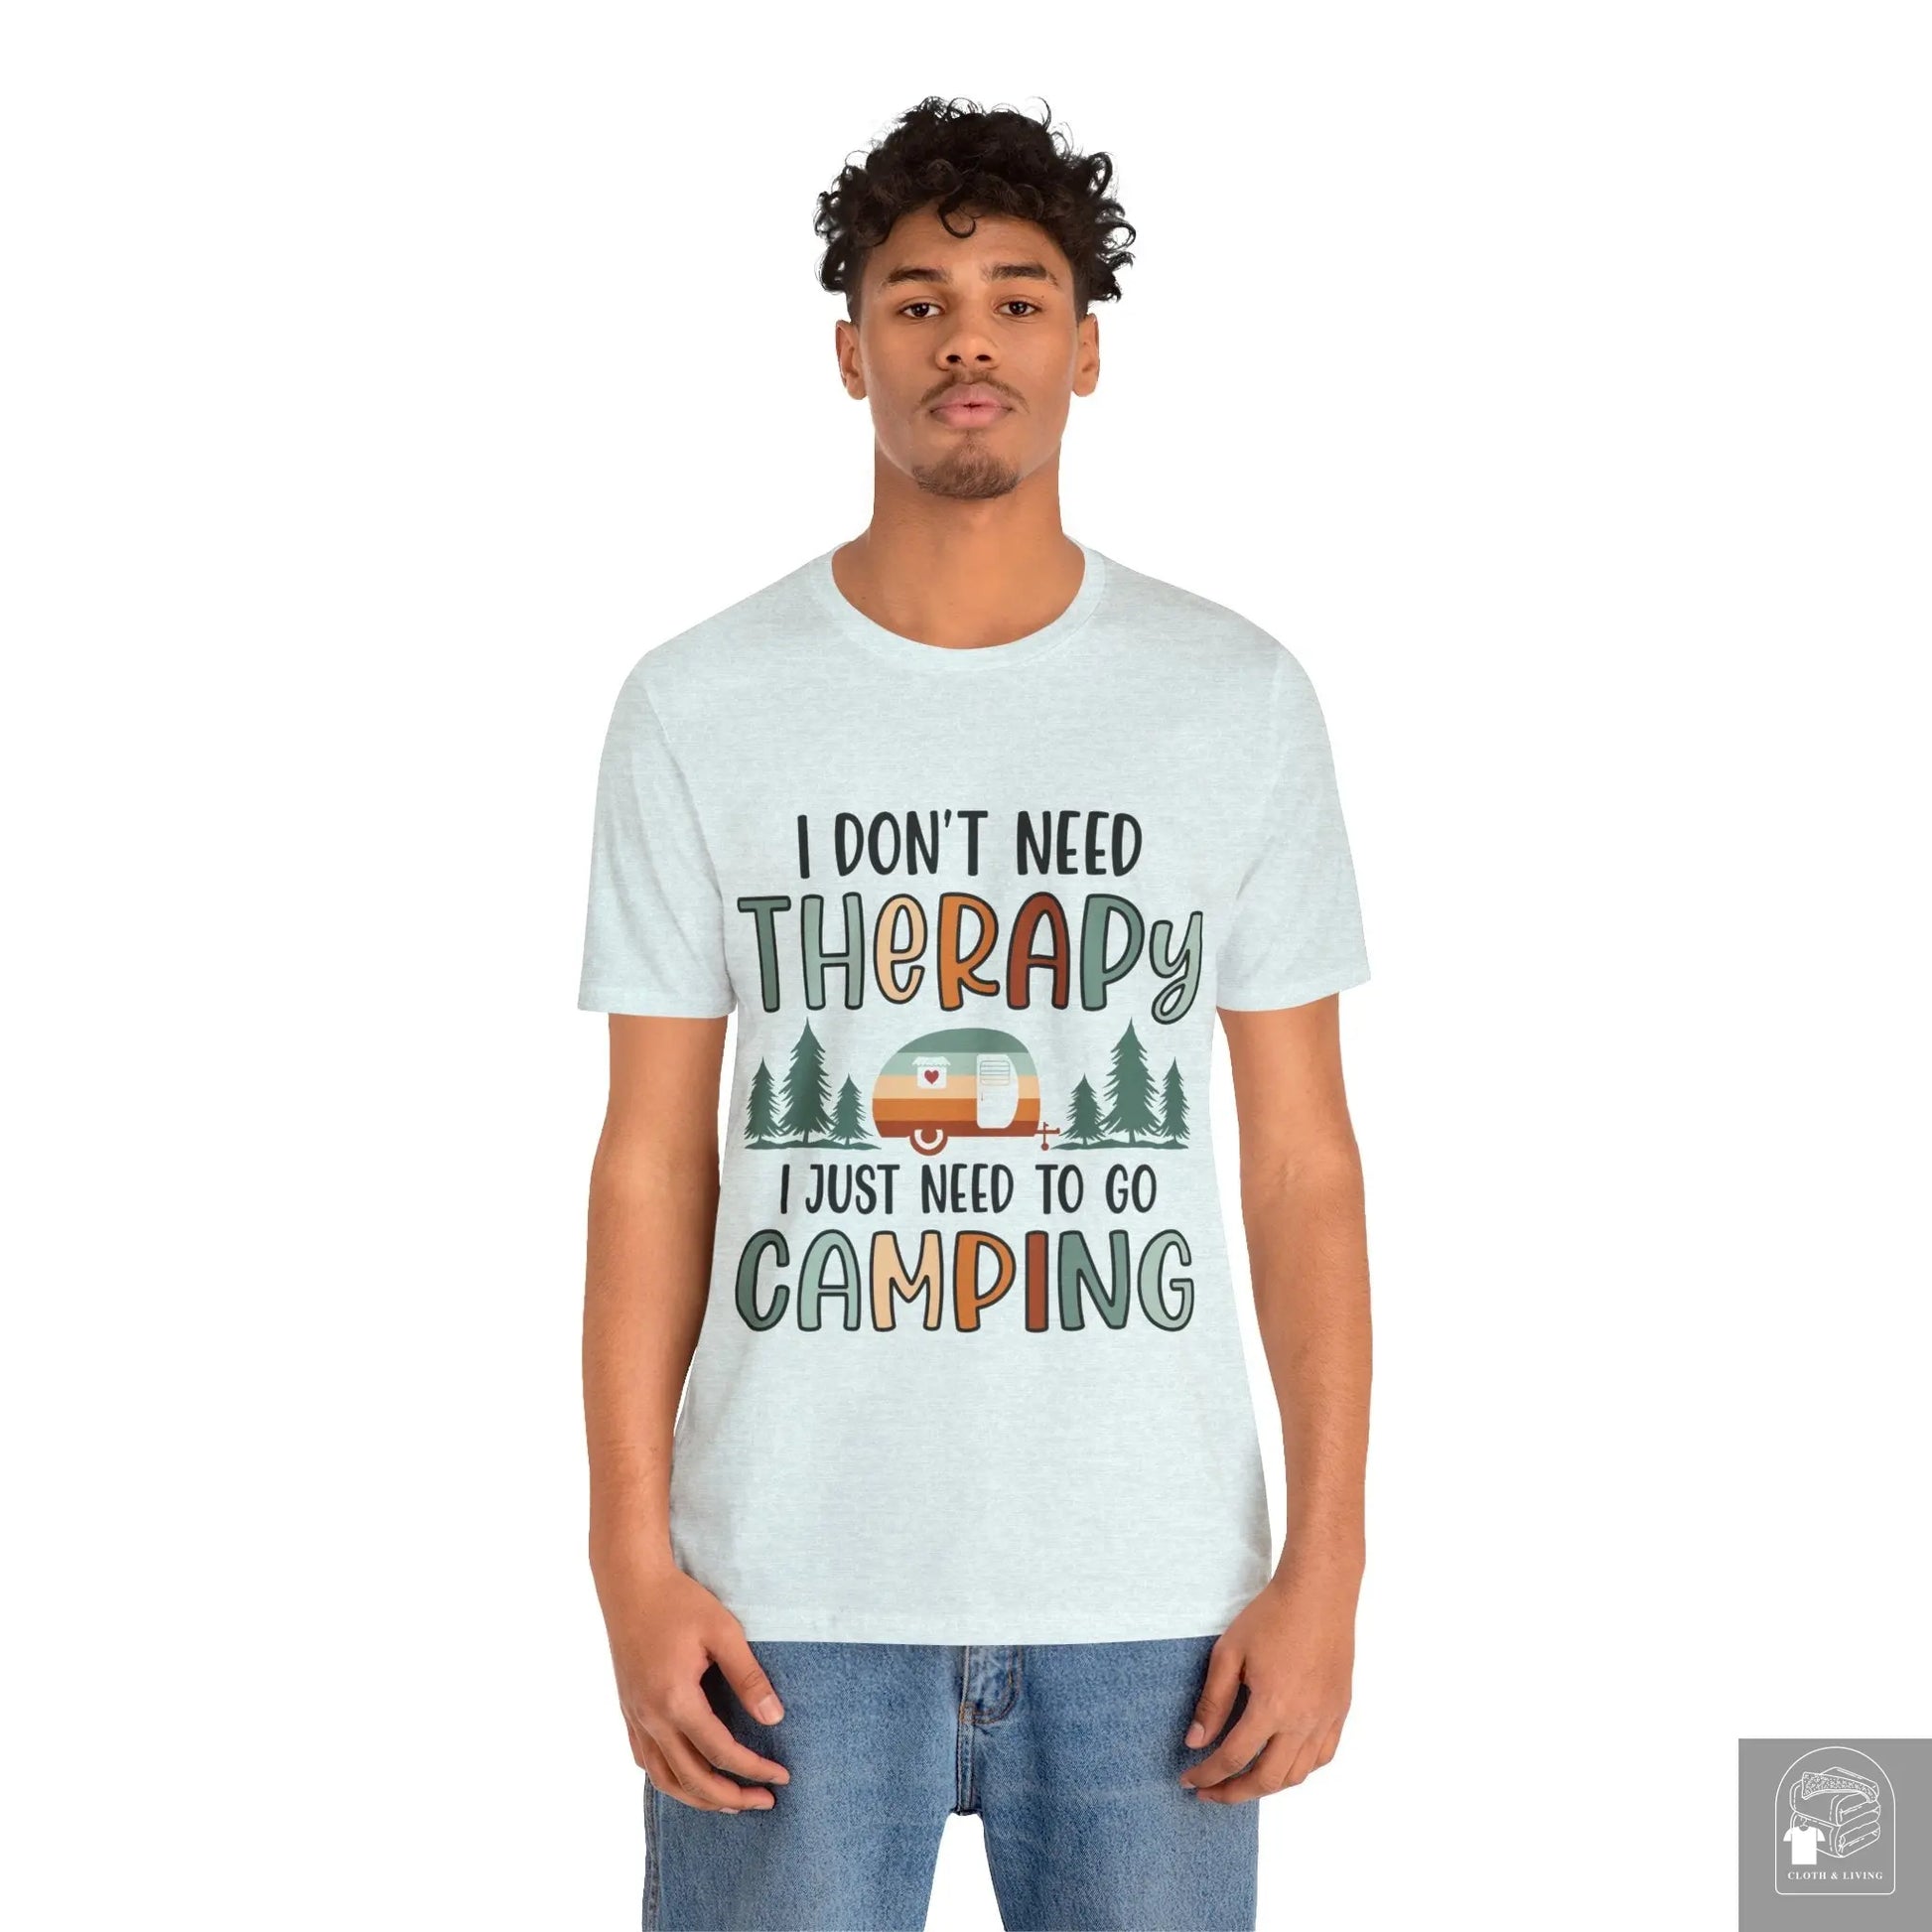 "I Just Need to go Camping" Unisex Jersey Short Sleeve Tee - Cloth & Living